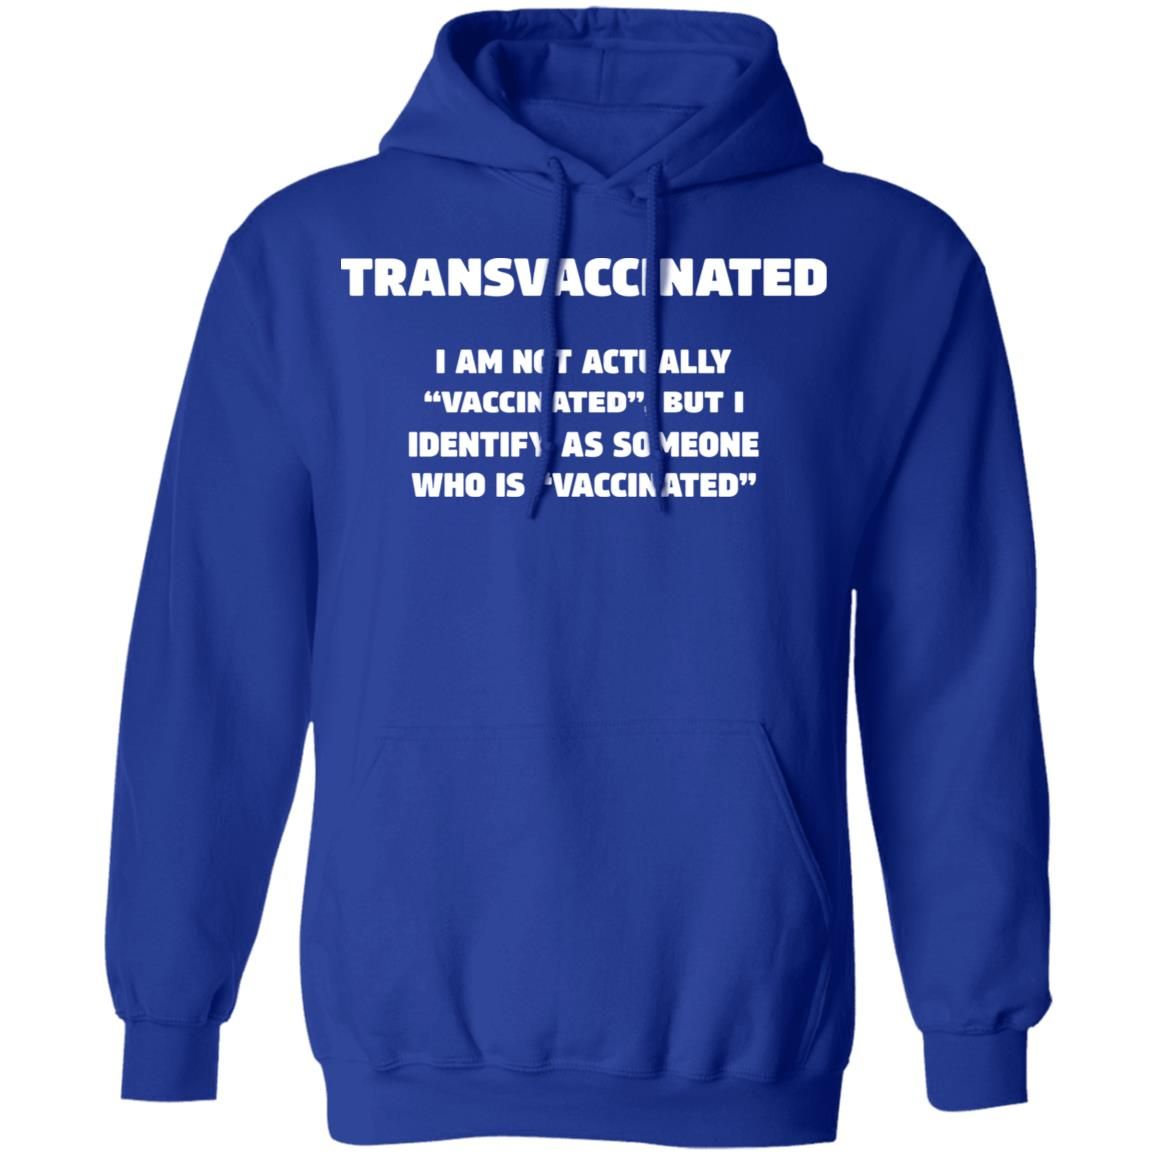 Funny Trans Vaccinated Tshirt Cute Vaccine Meme Shirt Style: Hoodie, Color: Royal